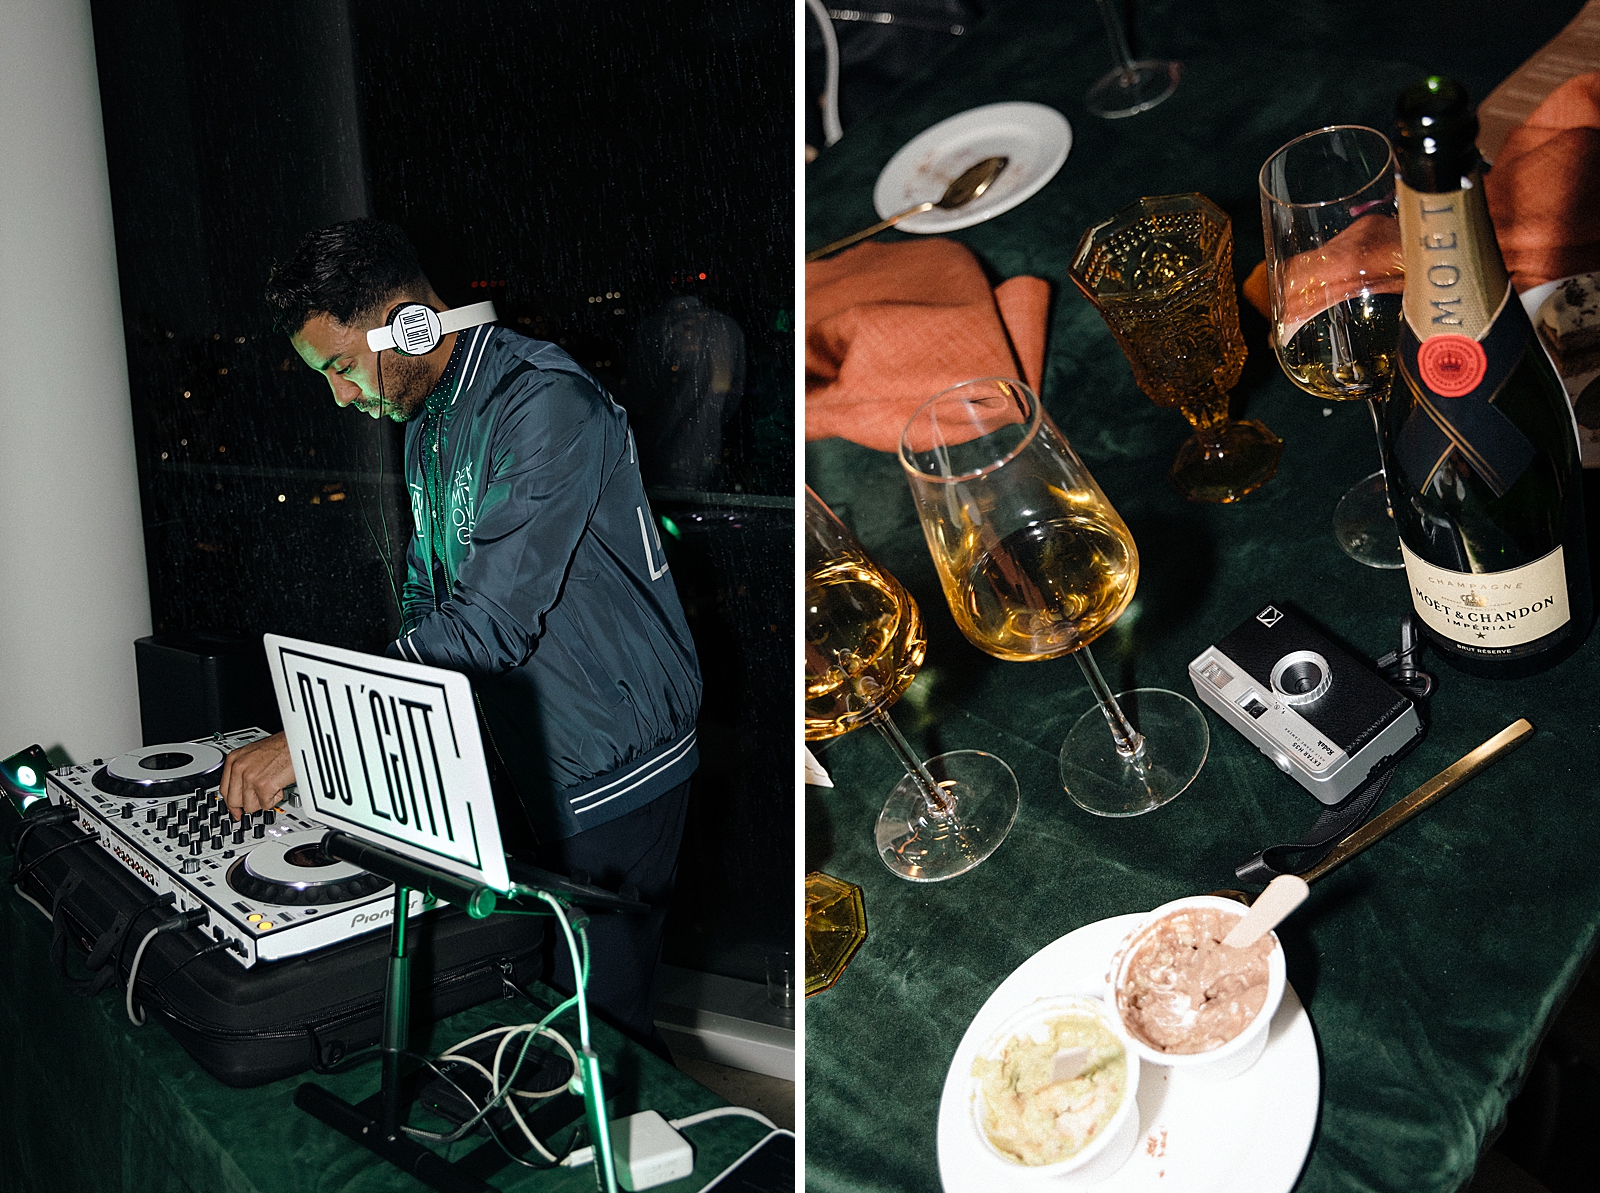 Left photo: Up close shot of the DJ and his sound board. 
Right photo: Up close shot of dessert and wine on a reception table. 